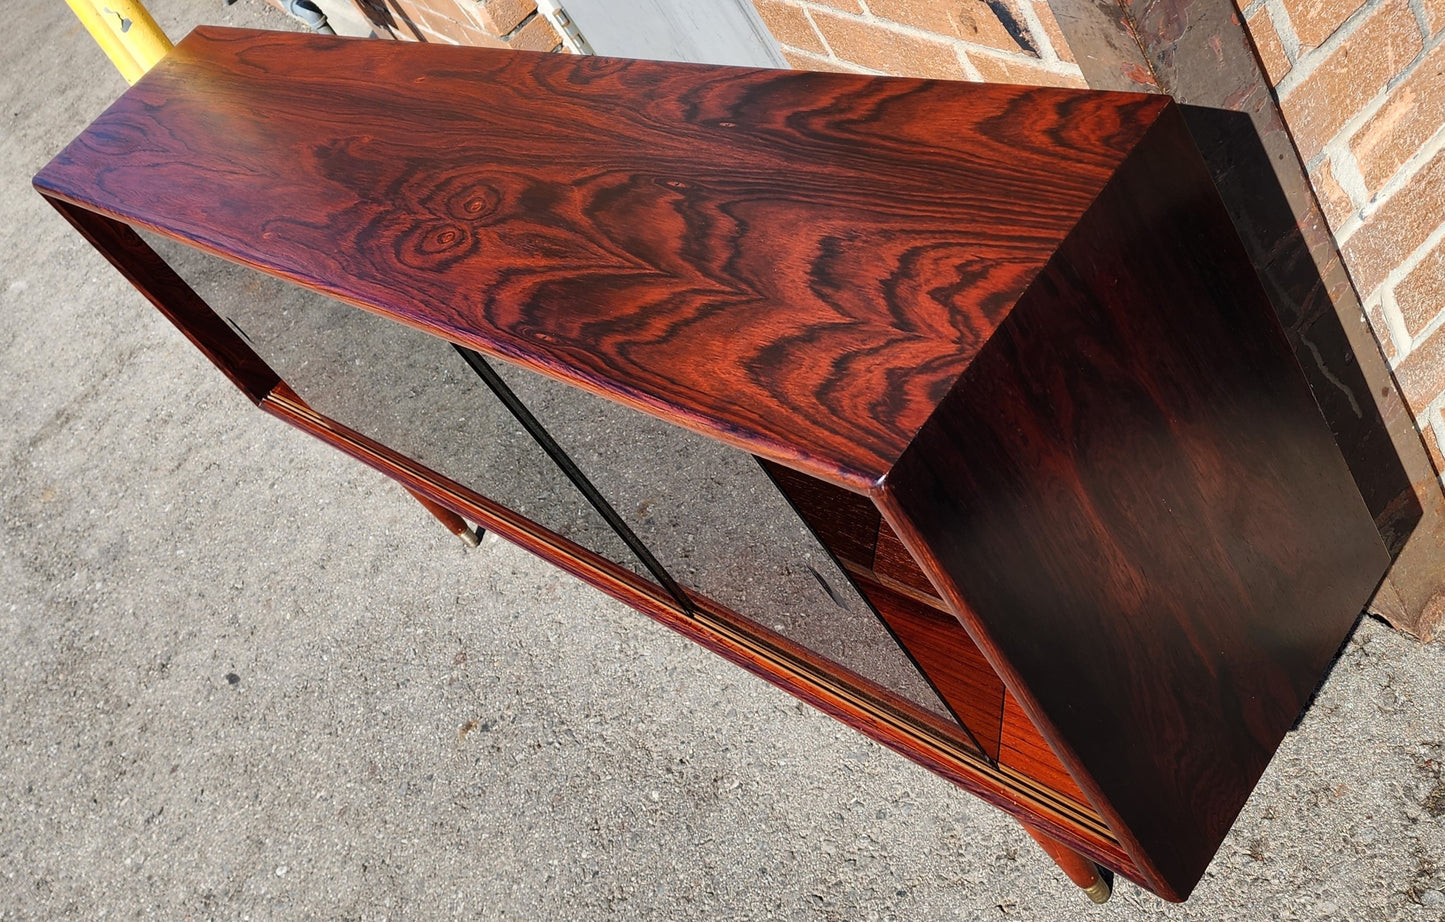 REFINISHED Danish Mid Century Modern Rosewood Display 59" by A. Christensen